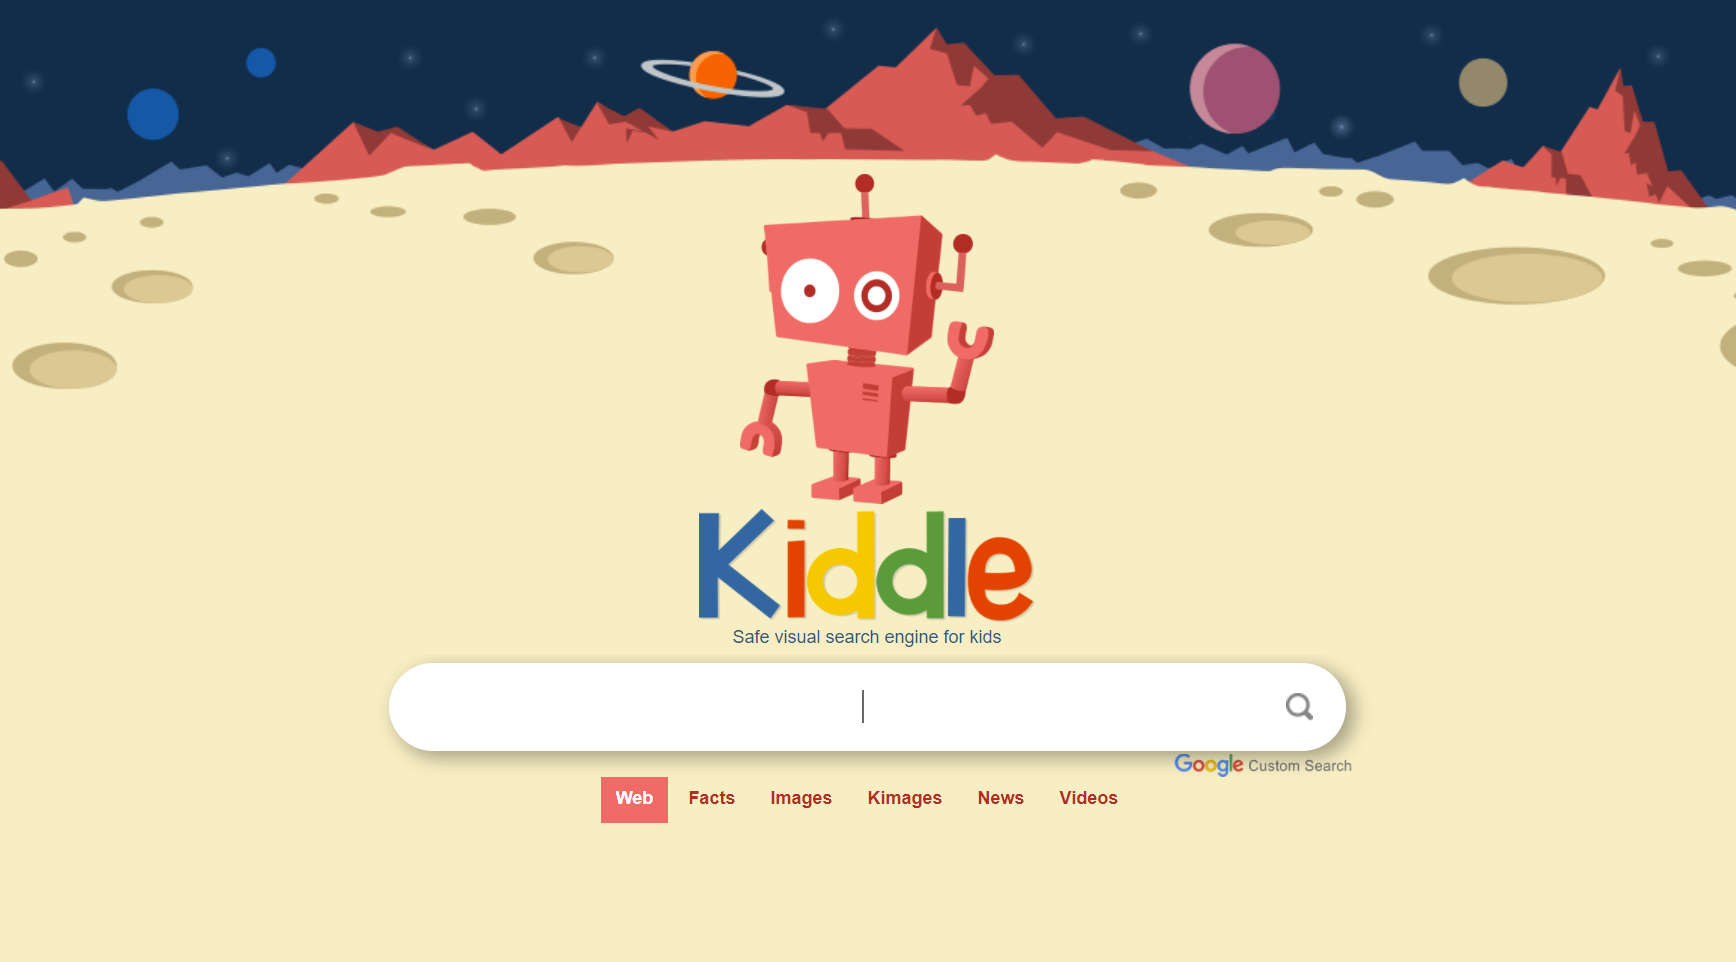 The Kiddle homepage.